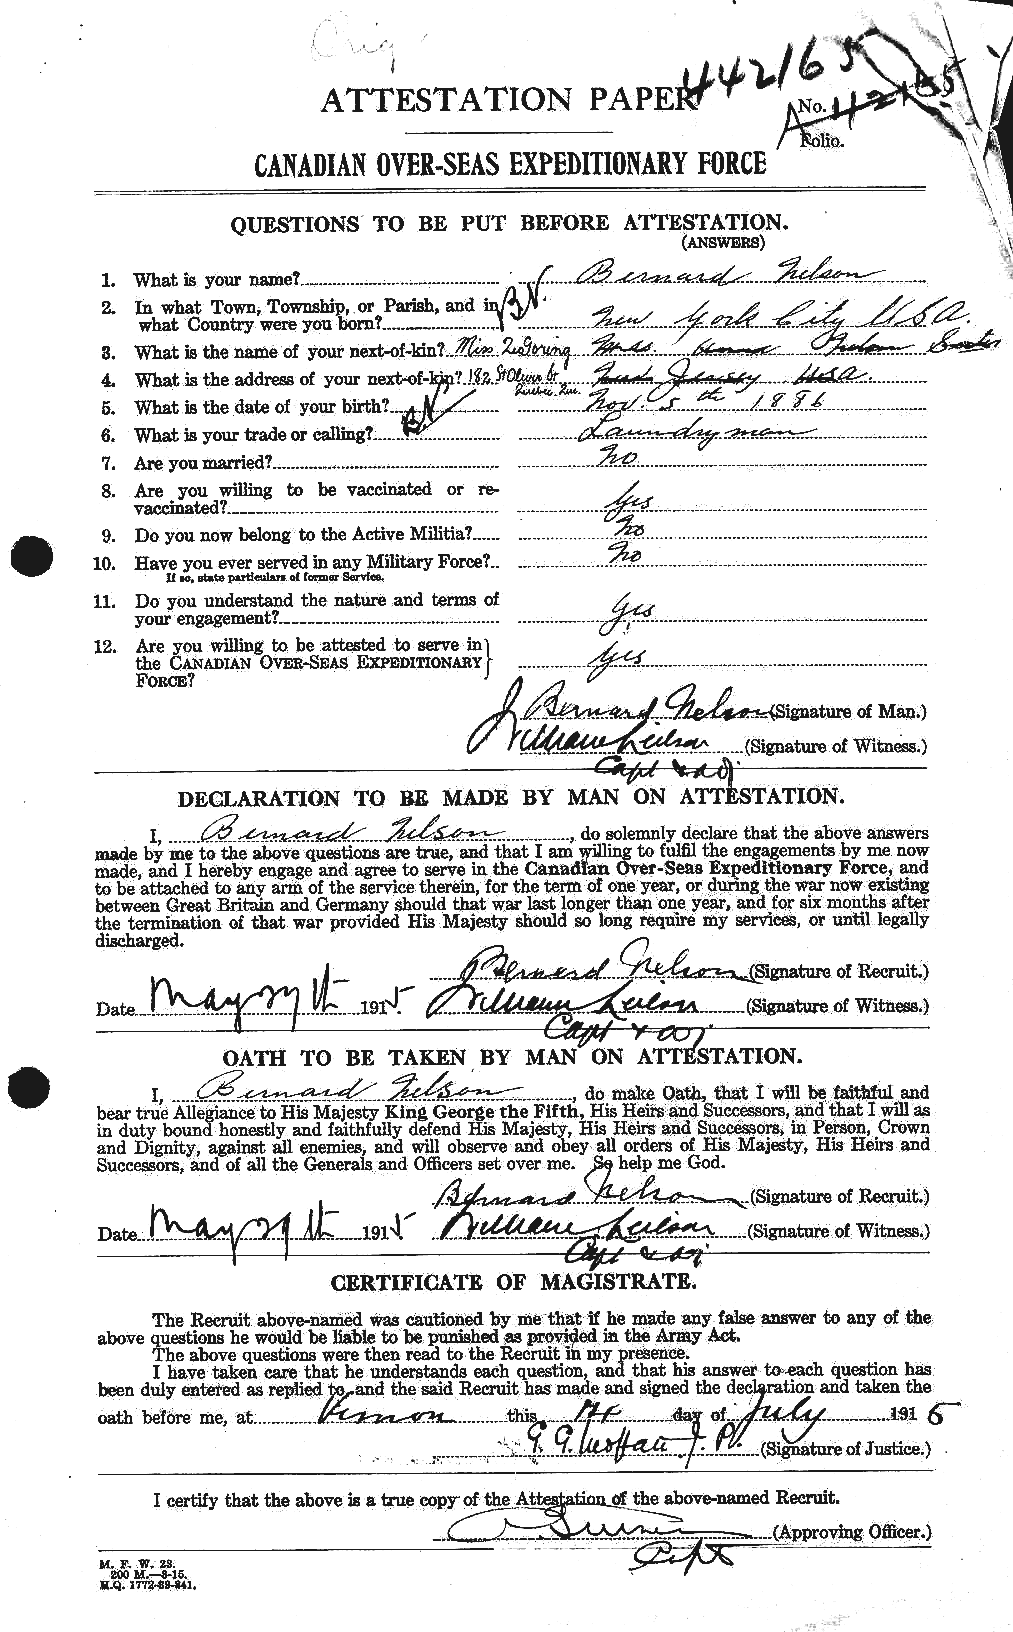 Personnel Records of the First World War - CEF 547121a